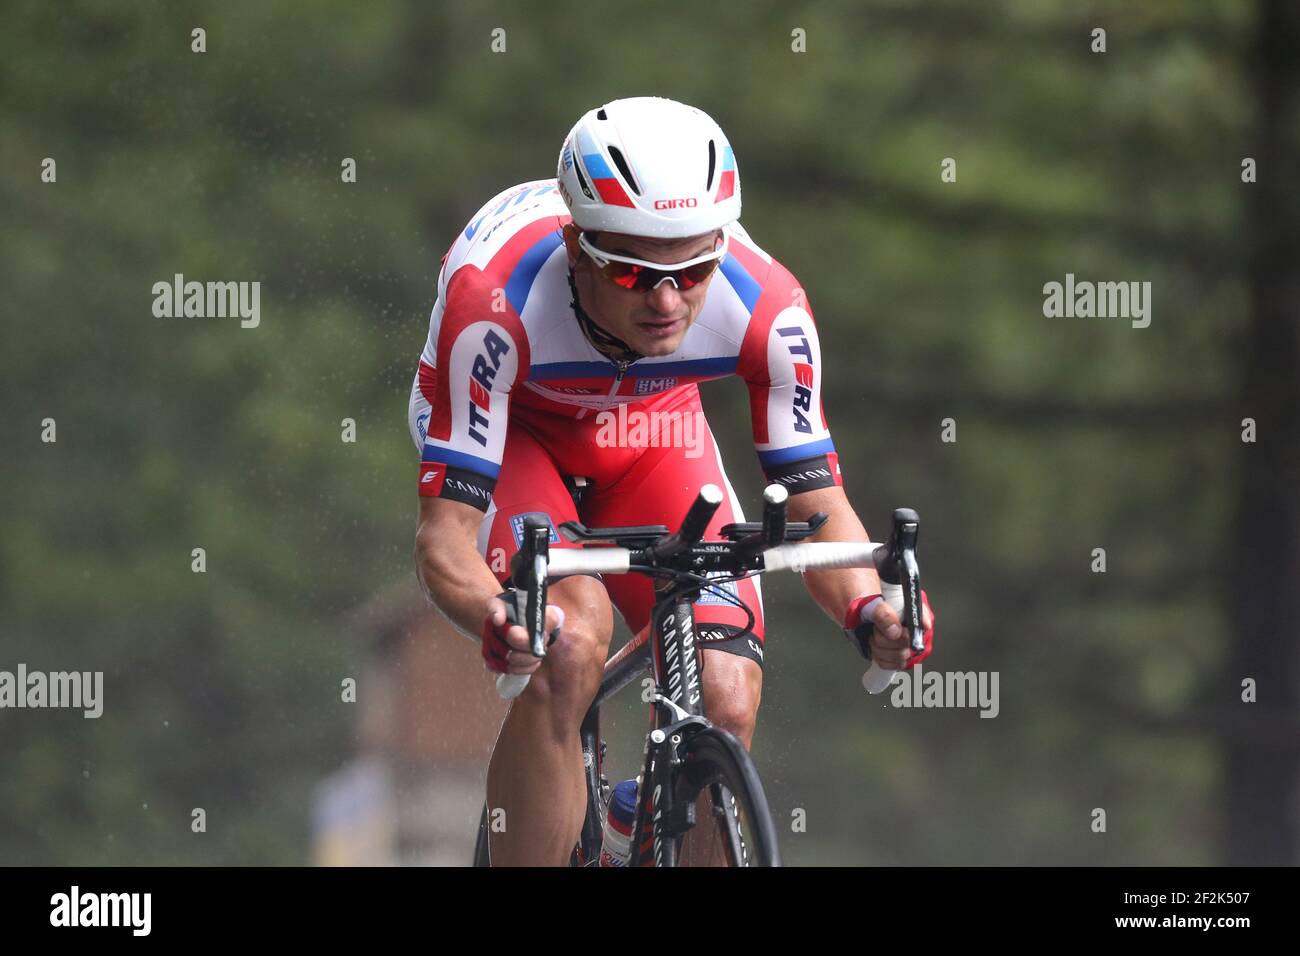 Cycling - UCI World Tour - Tour de France 2013 - Stage 17 - Individual Time Trial - Embrun - Chorges (32 km) - 17/07/2013 - Photo MANUEL BLONDEAU / DPPI - Eduard Vorganov of Russia and Team Katusha Stock Photo